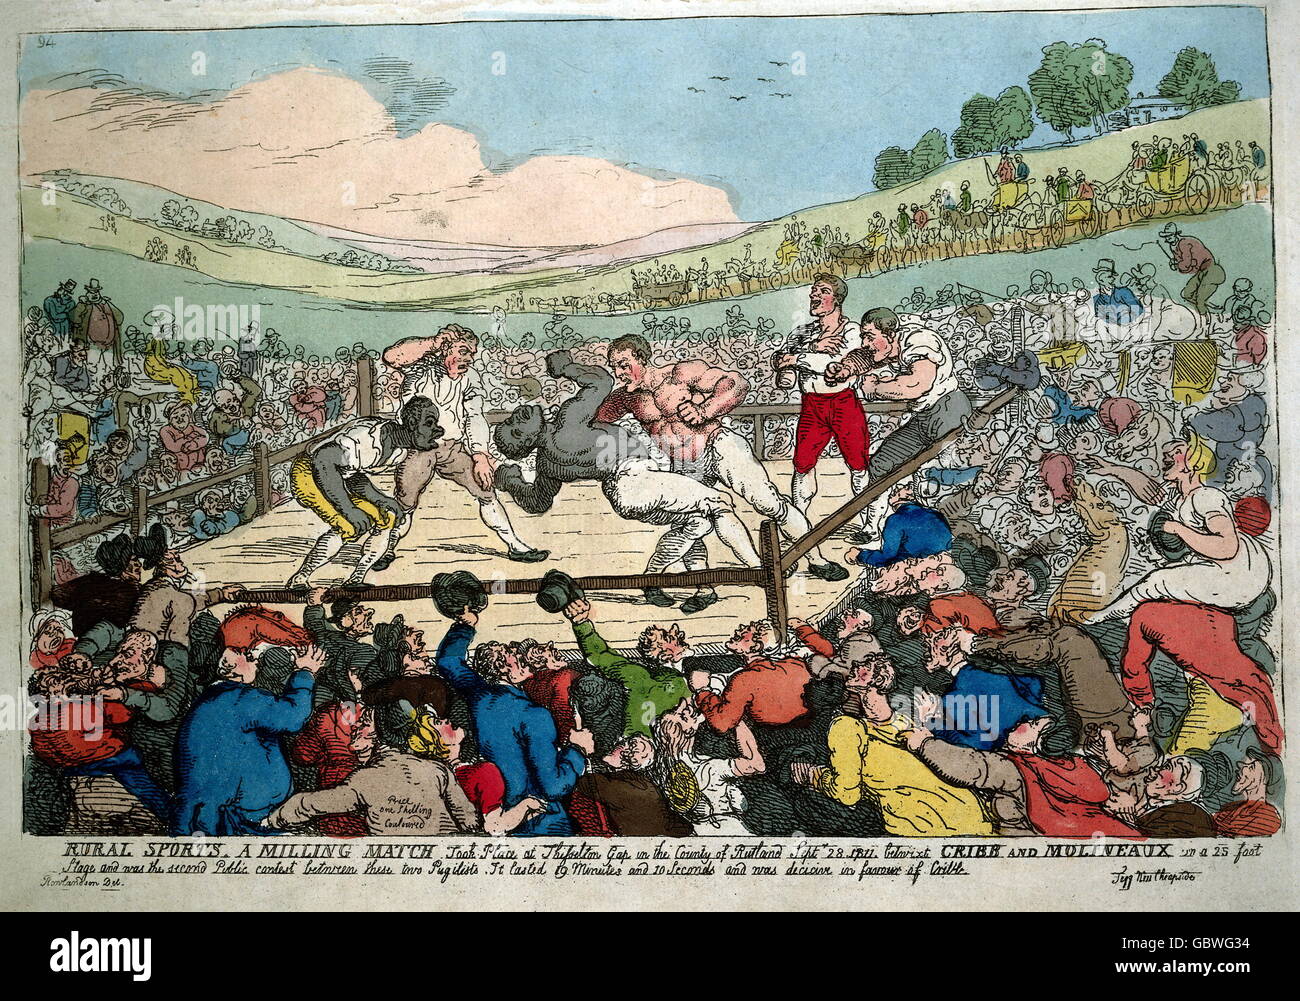 sports, boxing, fight Molineux versus Gribb, 18.9.1811, coloured aquatint by Thomas Rowlandson (1756 - 1827), printed by Th. Tegg, London, 38.5x26 centimeter, municipal museum Munich, Puppentheater museum, 'Rural Sports', winner Gribb after 19 minutes 10 seconds, Additional-Rights-Clearences-Not Available Stock Photo